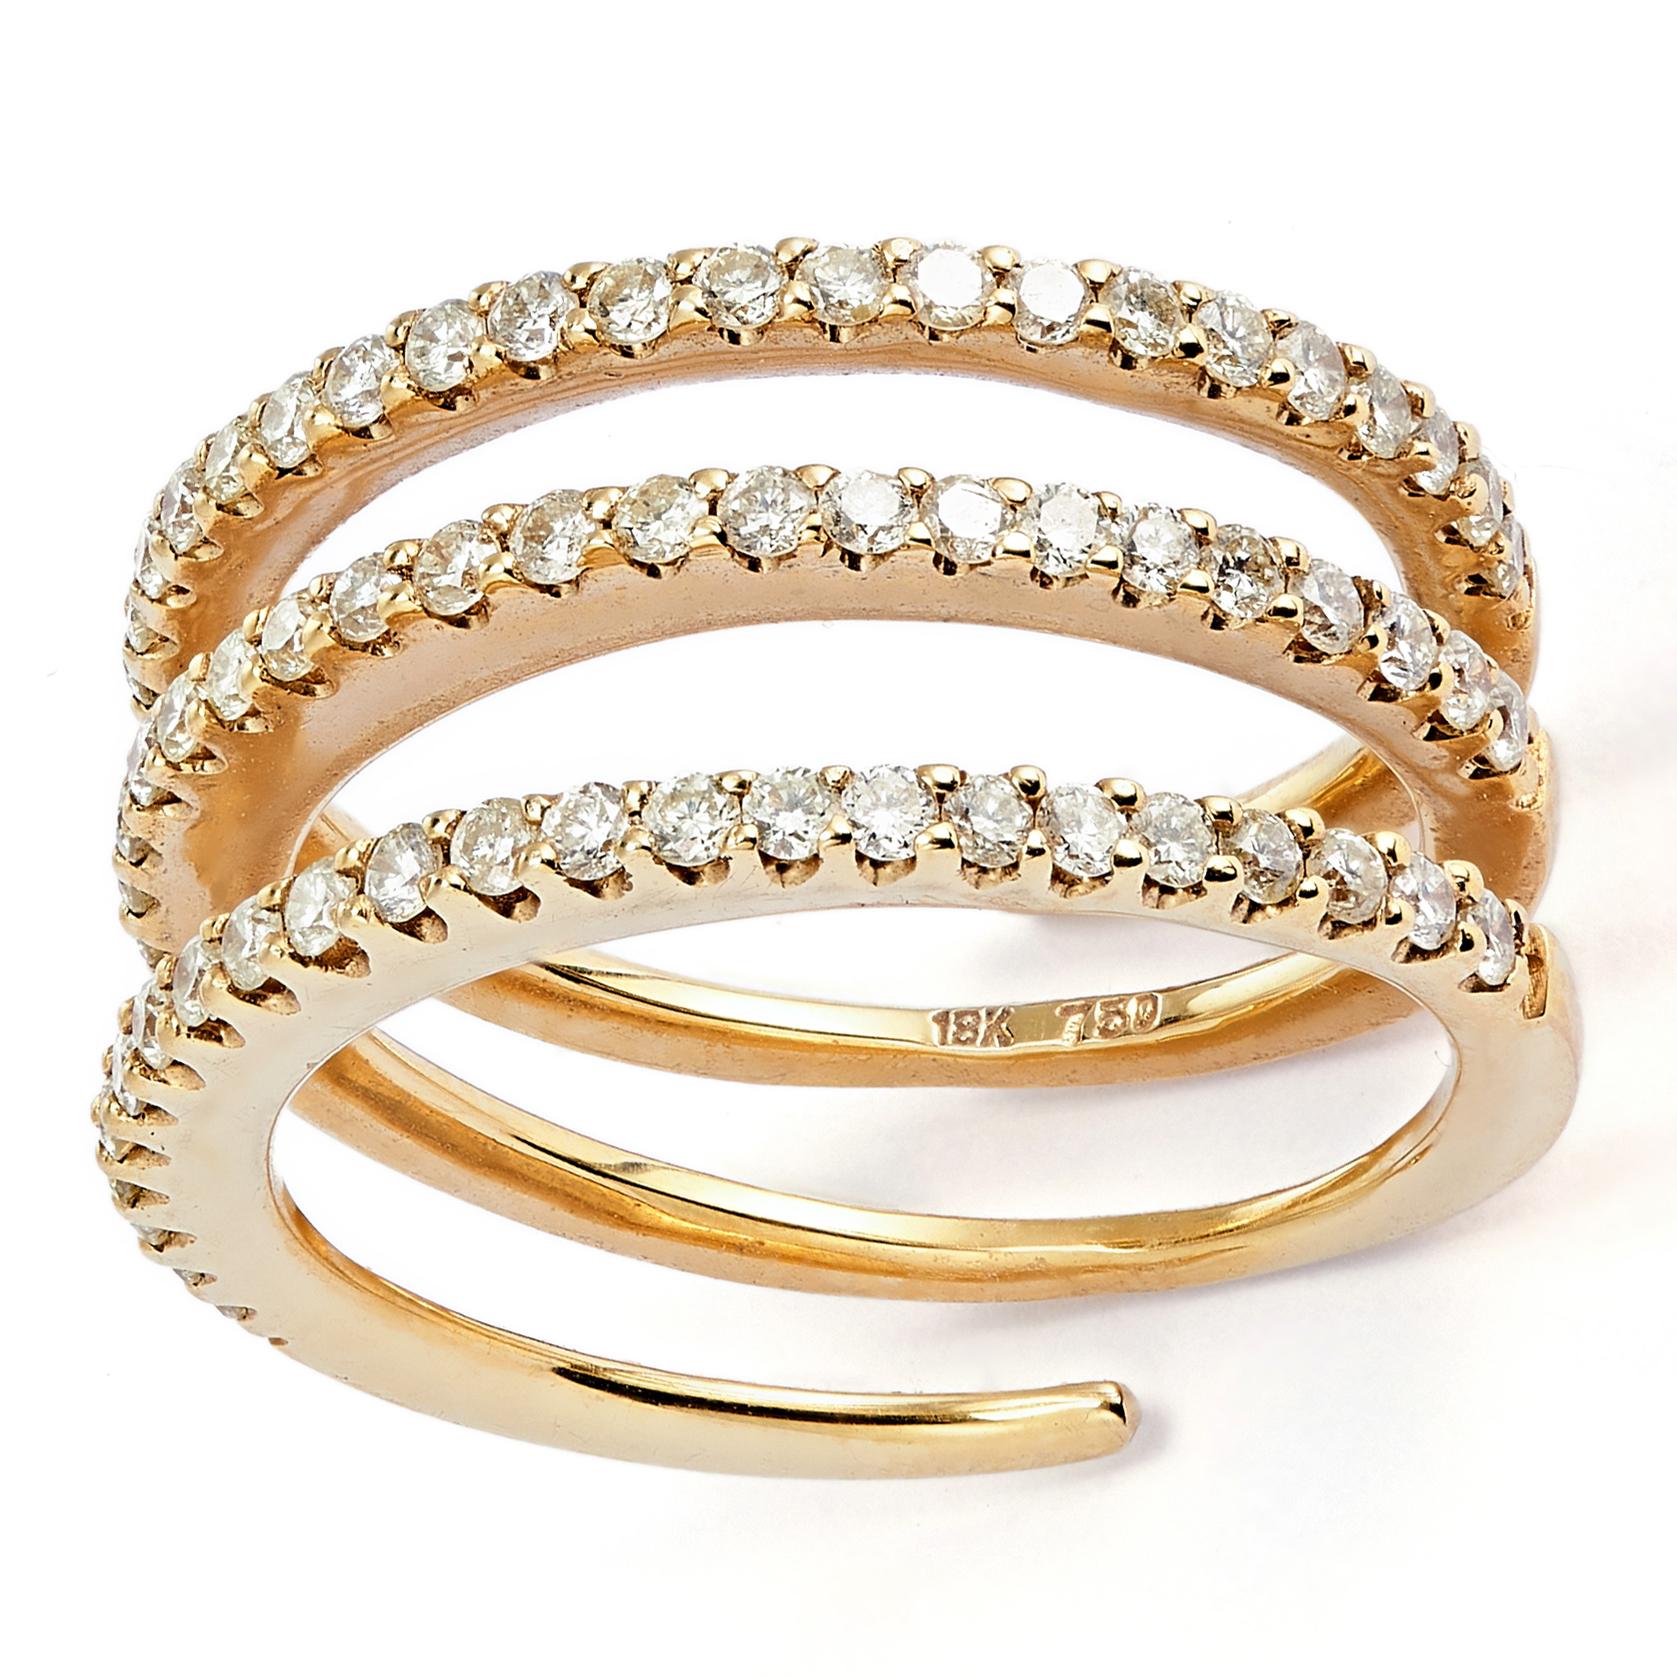 This is a ring that makes a statement during cocktail hour as it coils 3 times around the finger. A bold, yet elegant design that integrates 3 rings into 1 with the appearance of 3 simple diamond bands evenly spaced.

This 18K yellow gold pave ring